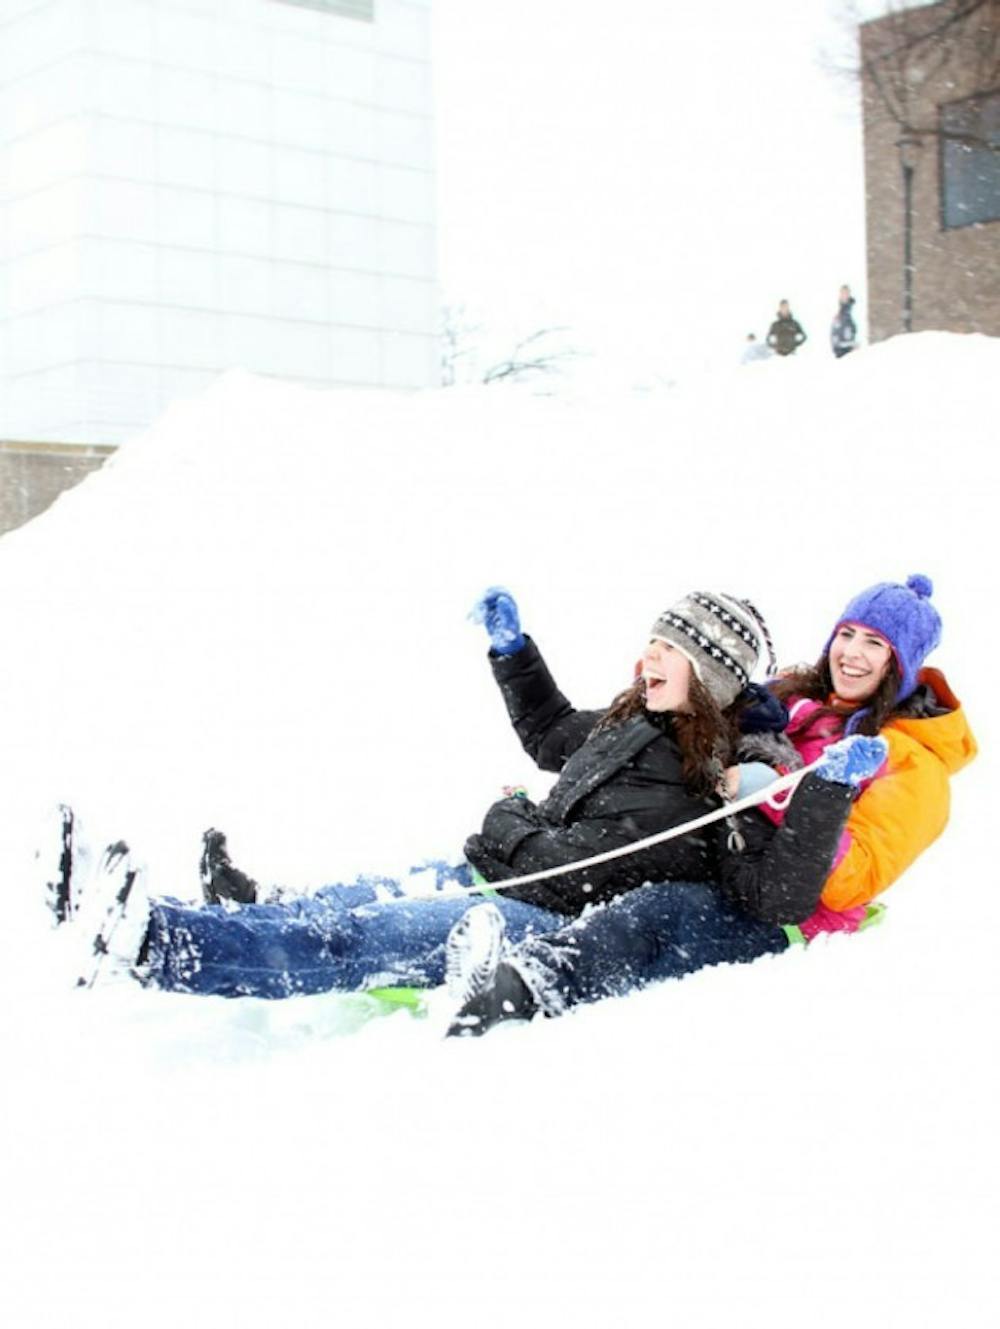 Despite the bitterly cold winter temperatures in Buffalo, the area is full of fun
outdoor activities like hiking, ice skating and sledding.&nbsp;Spectrum Stock Photo